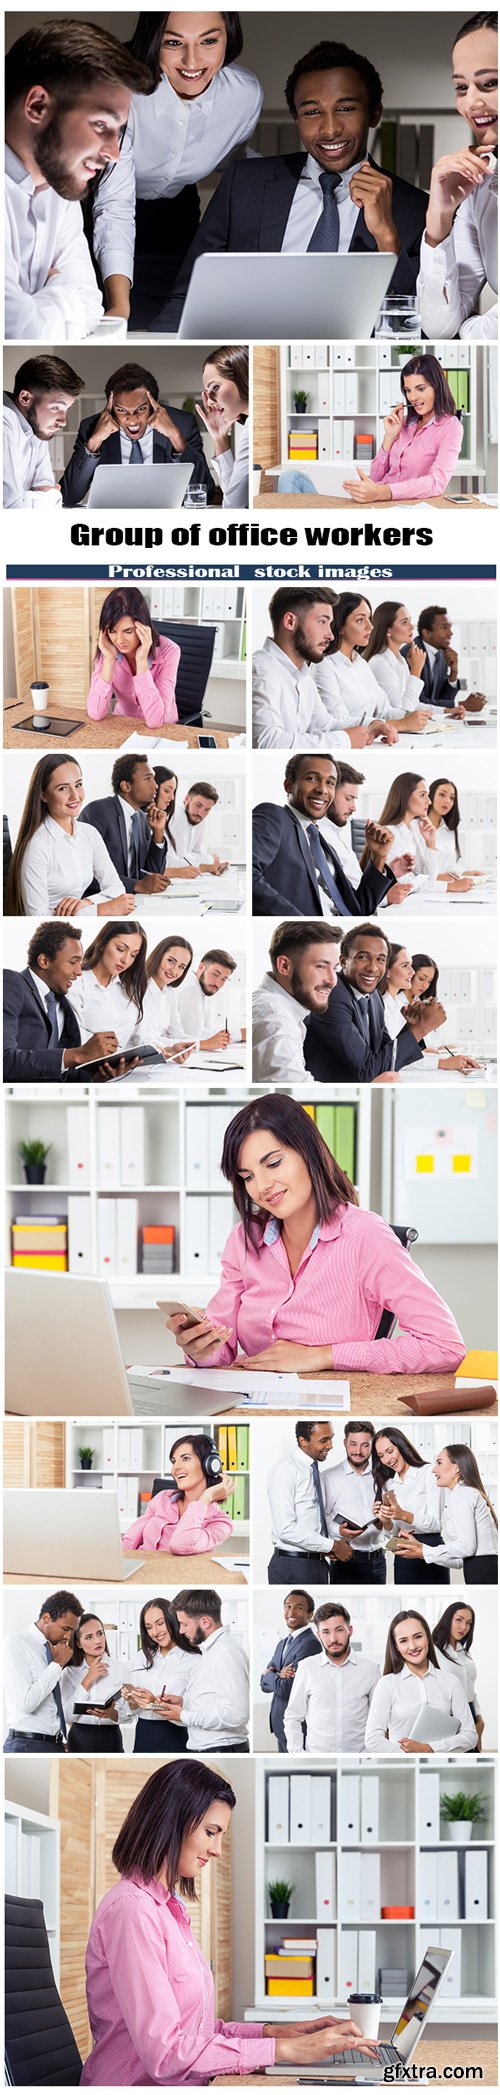 Group of office workers